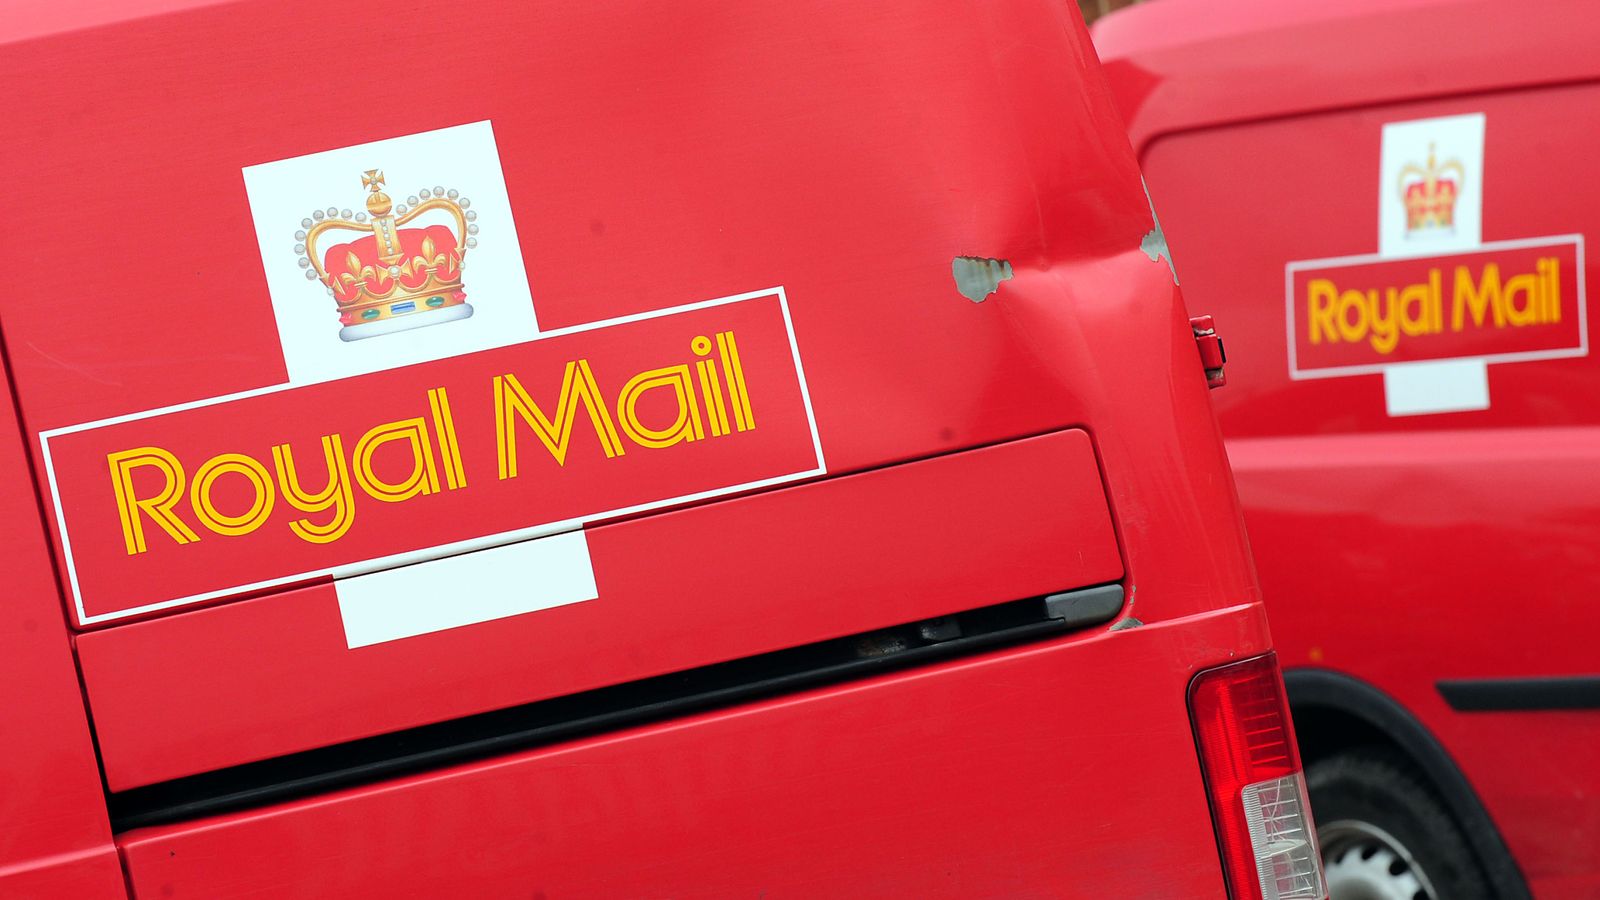 Estimated 15.7million people hit by postal delays charity says, as it calls for tougher review into Royal Mail